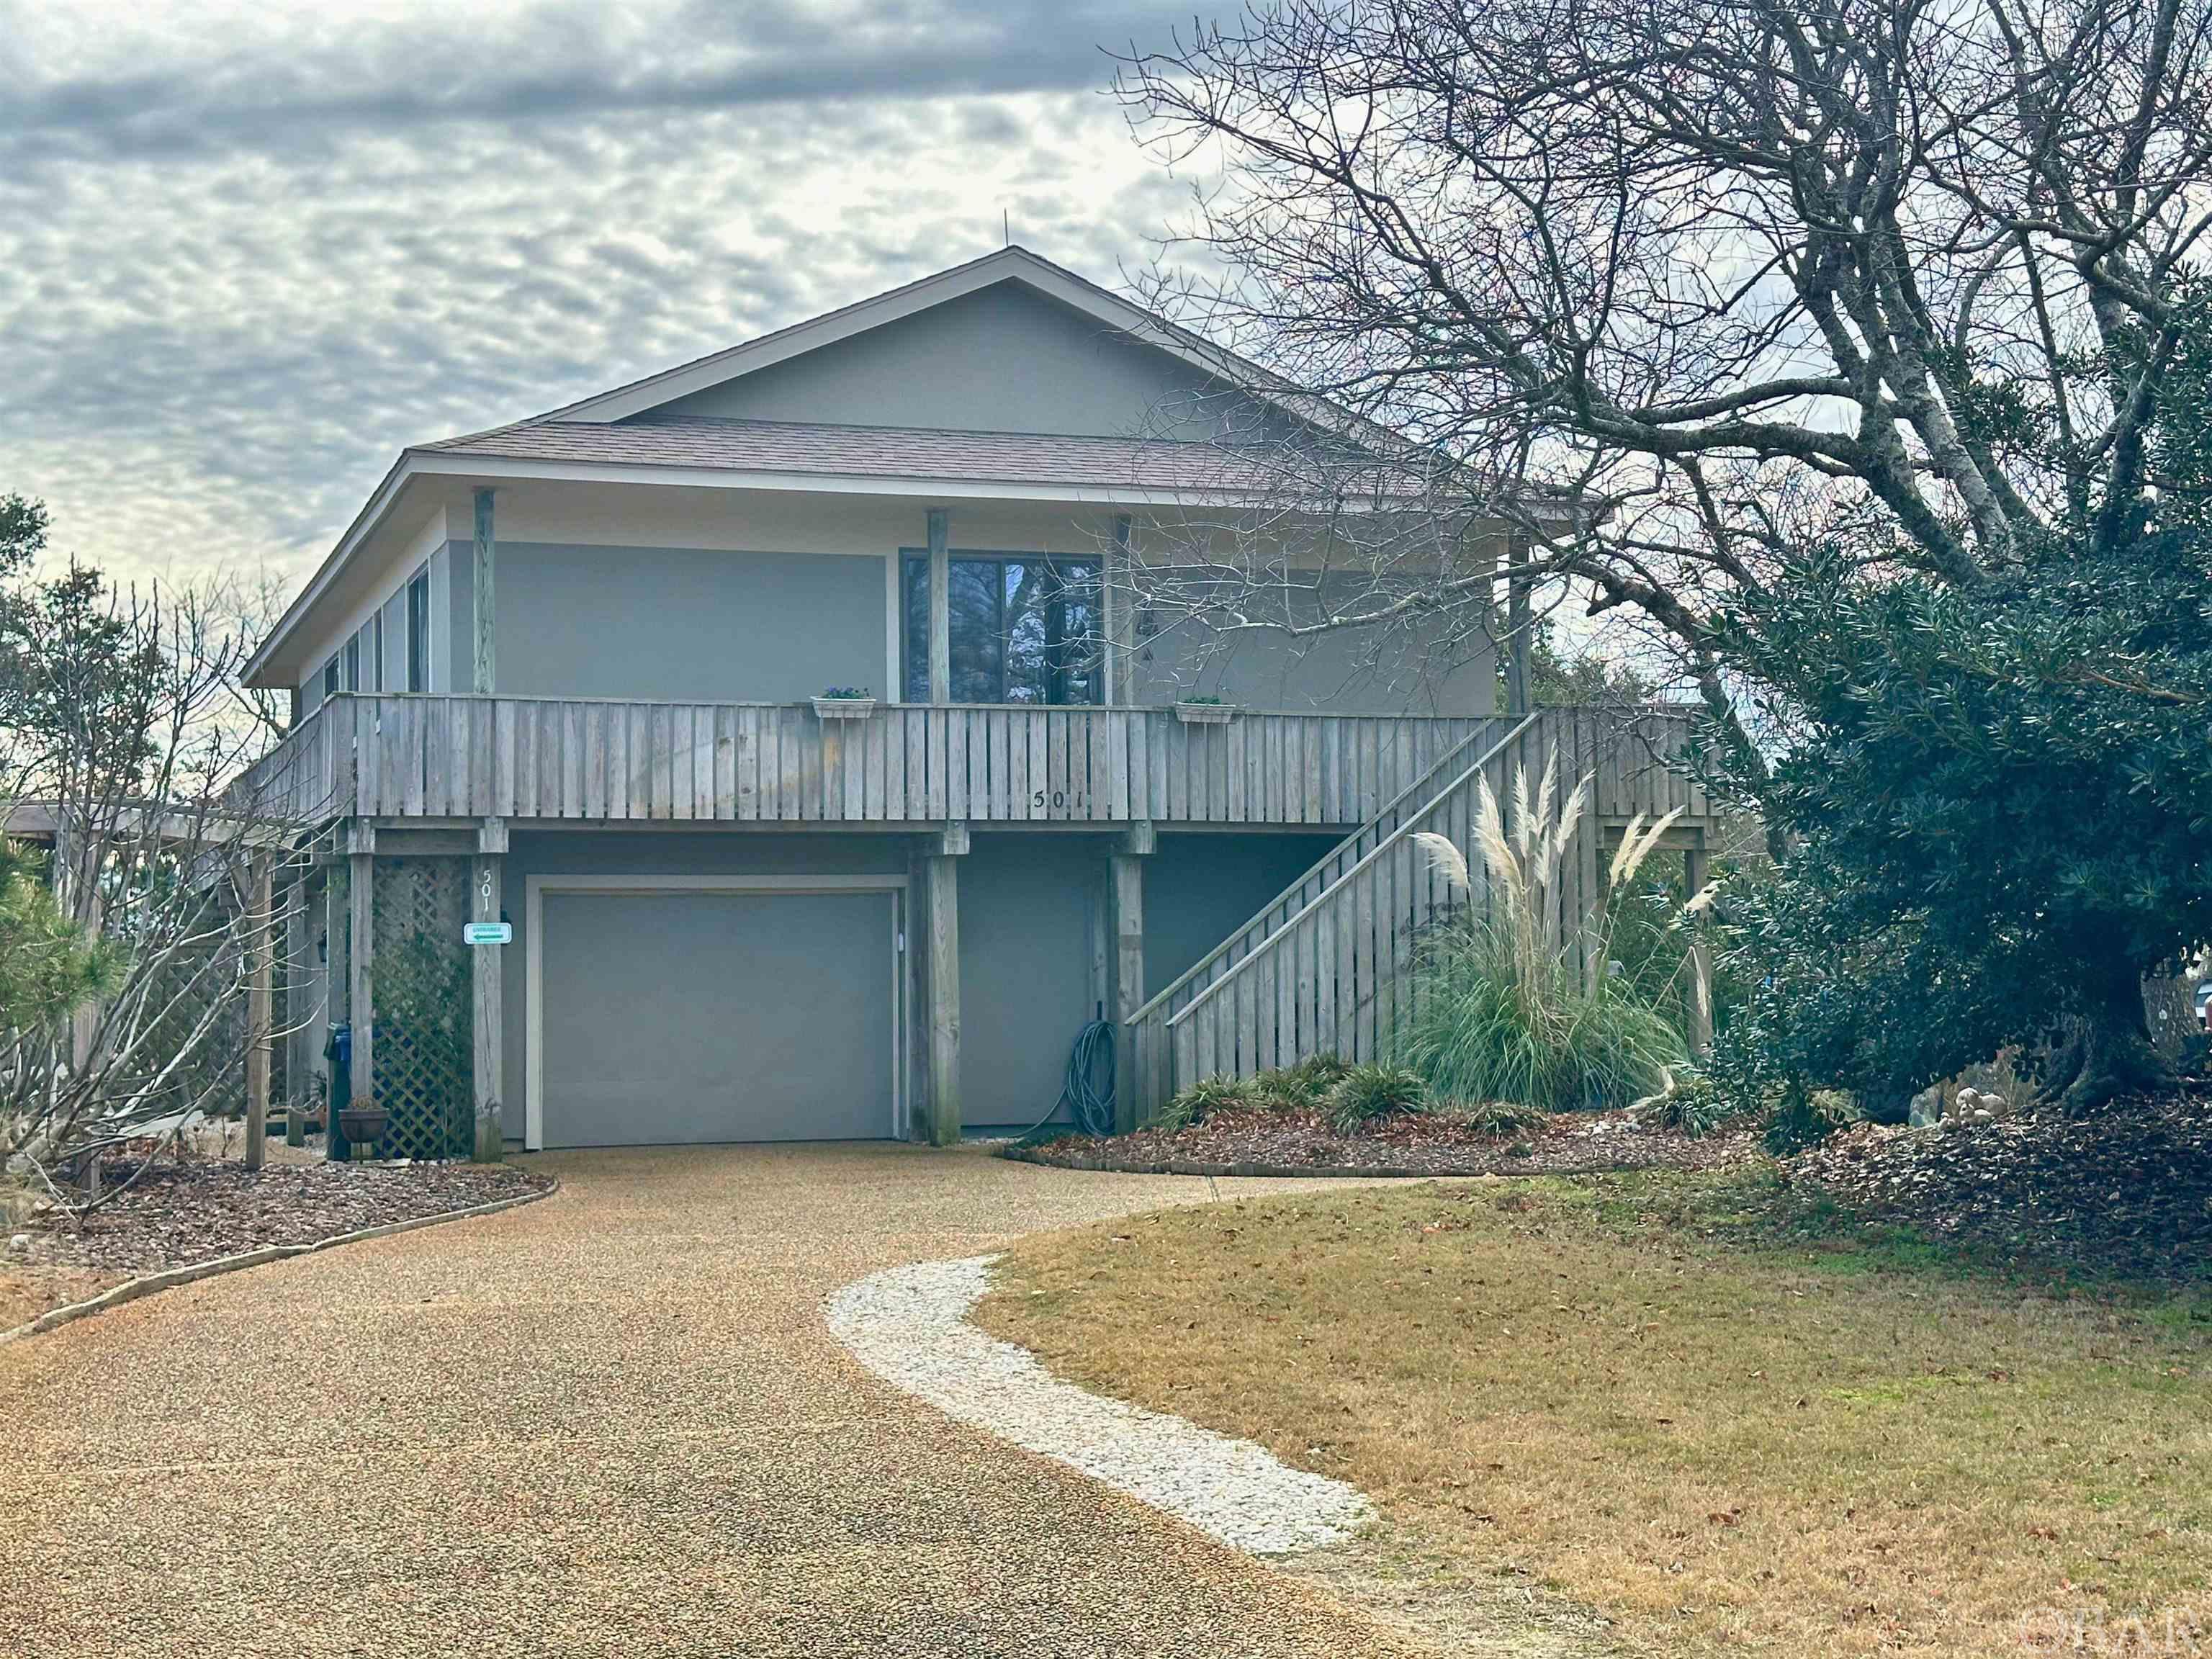 Located in a prime Nags Head Waterfront community. This High and Dry Elevation brings gorgeous sunset views over the water and the Roanoke Sound from the large covered porch. This 3 Bedroom 2.5 Bath home has an additional flex space room that could be used as a home office, exercise room, artist studio, music room, or playroom. There is a large 12x5 pantry located on the main level as well. The primary suite with huge jetted tub is located on the 1st Floor. As well as the Kitchen and Great Room. The remaining bedrooms, flex room, and full bath are located on the ground level. This home boasts with energy efficiency with a Geo-Thermal HVAC system to heat and cool. Along with Propane Water Heater, Range, and the firelogs The 36x10 covered porch is a great place to enjoy the sea breezes and just relax. The 15x20 garage provides a dry entry on those coastal rainy days. Plus the attic is fully heated and cooled to preserve your stored items. Recent Improvements include water heater, flooring, roofing, kitchen appliances and countertops, exterior paint, entry door with storm door and several sliding glass door panels! Has been used lovingly as a primary home, but was previously in a rental program and was successful. Other expense listed is for propane gas. Polybutelyne piping is still present in house. Where new fixtures have been installed new pex piping is in place.